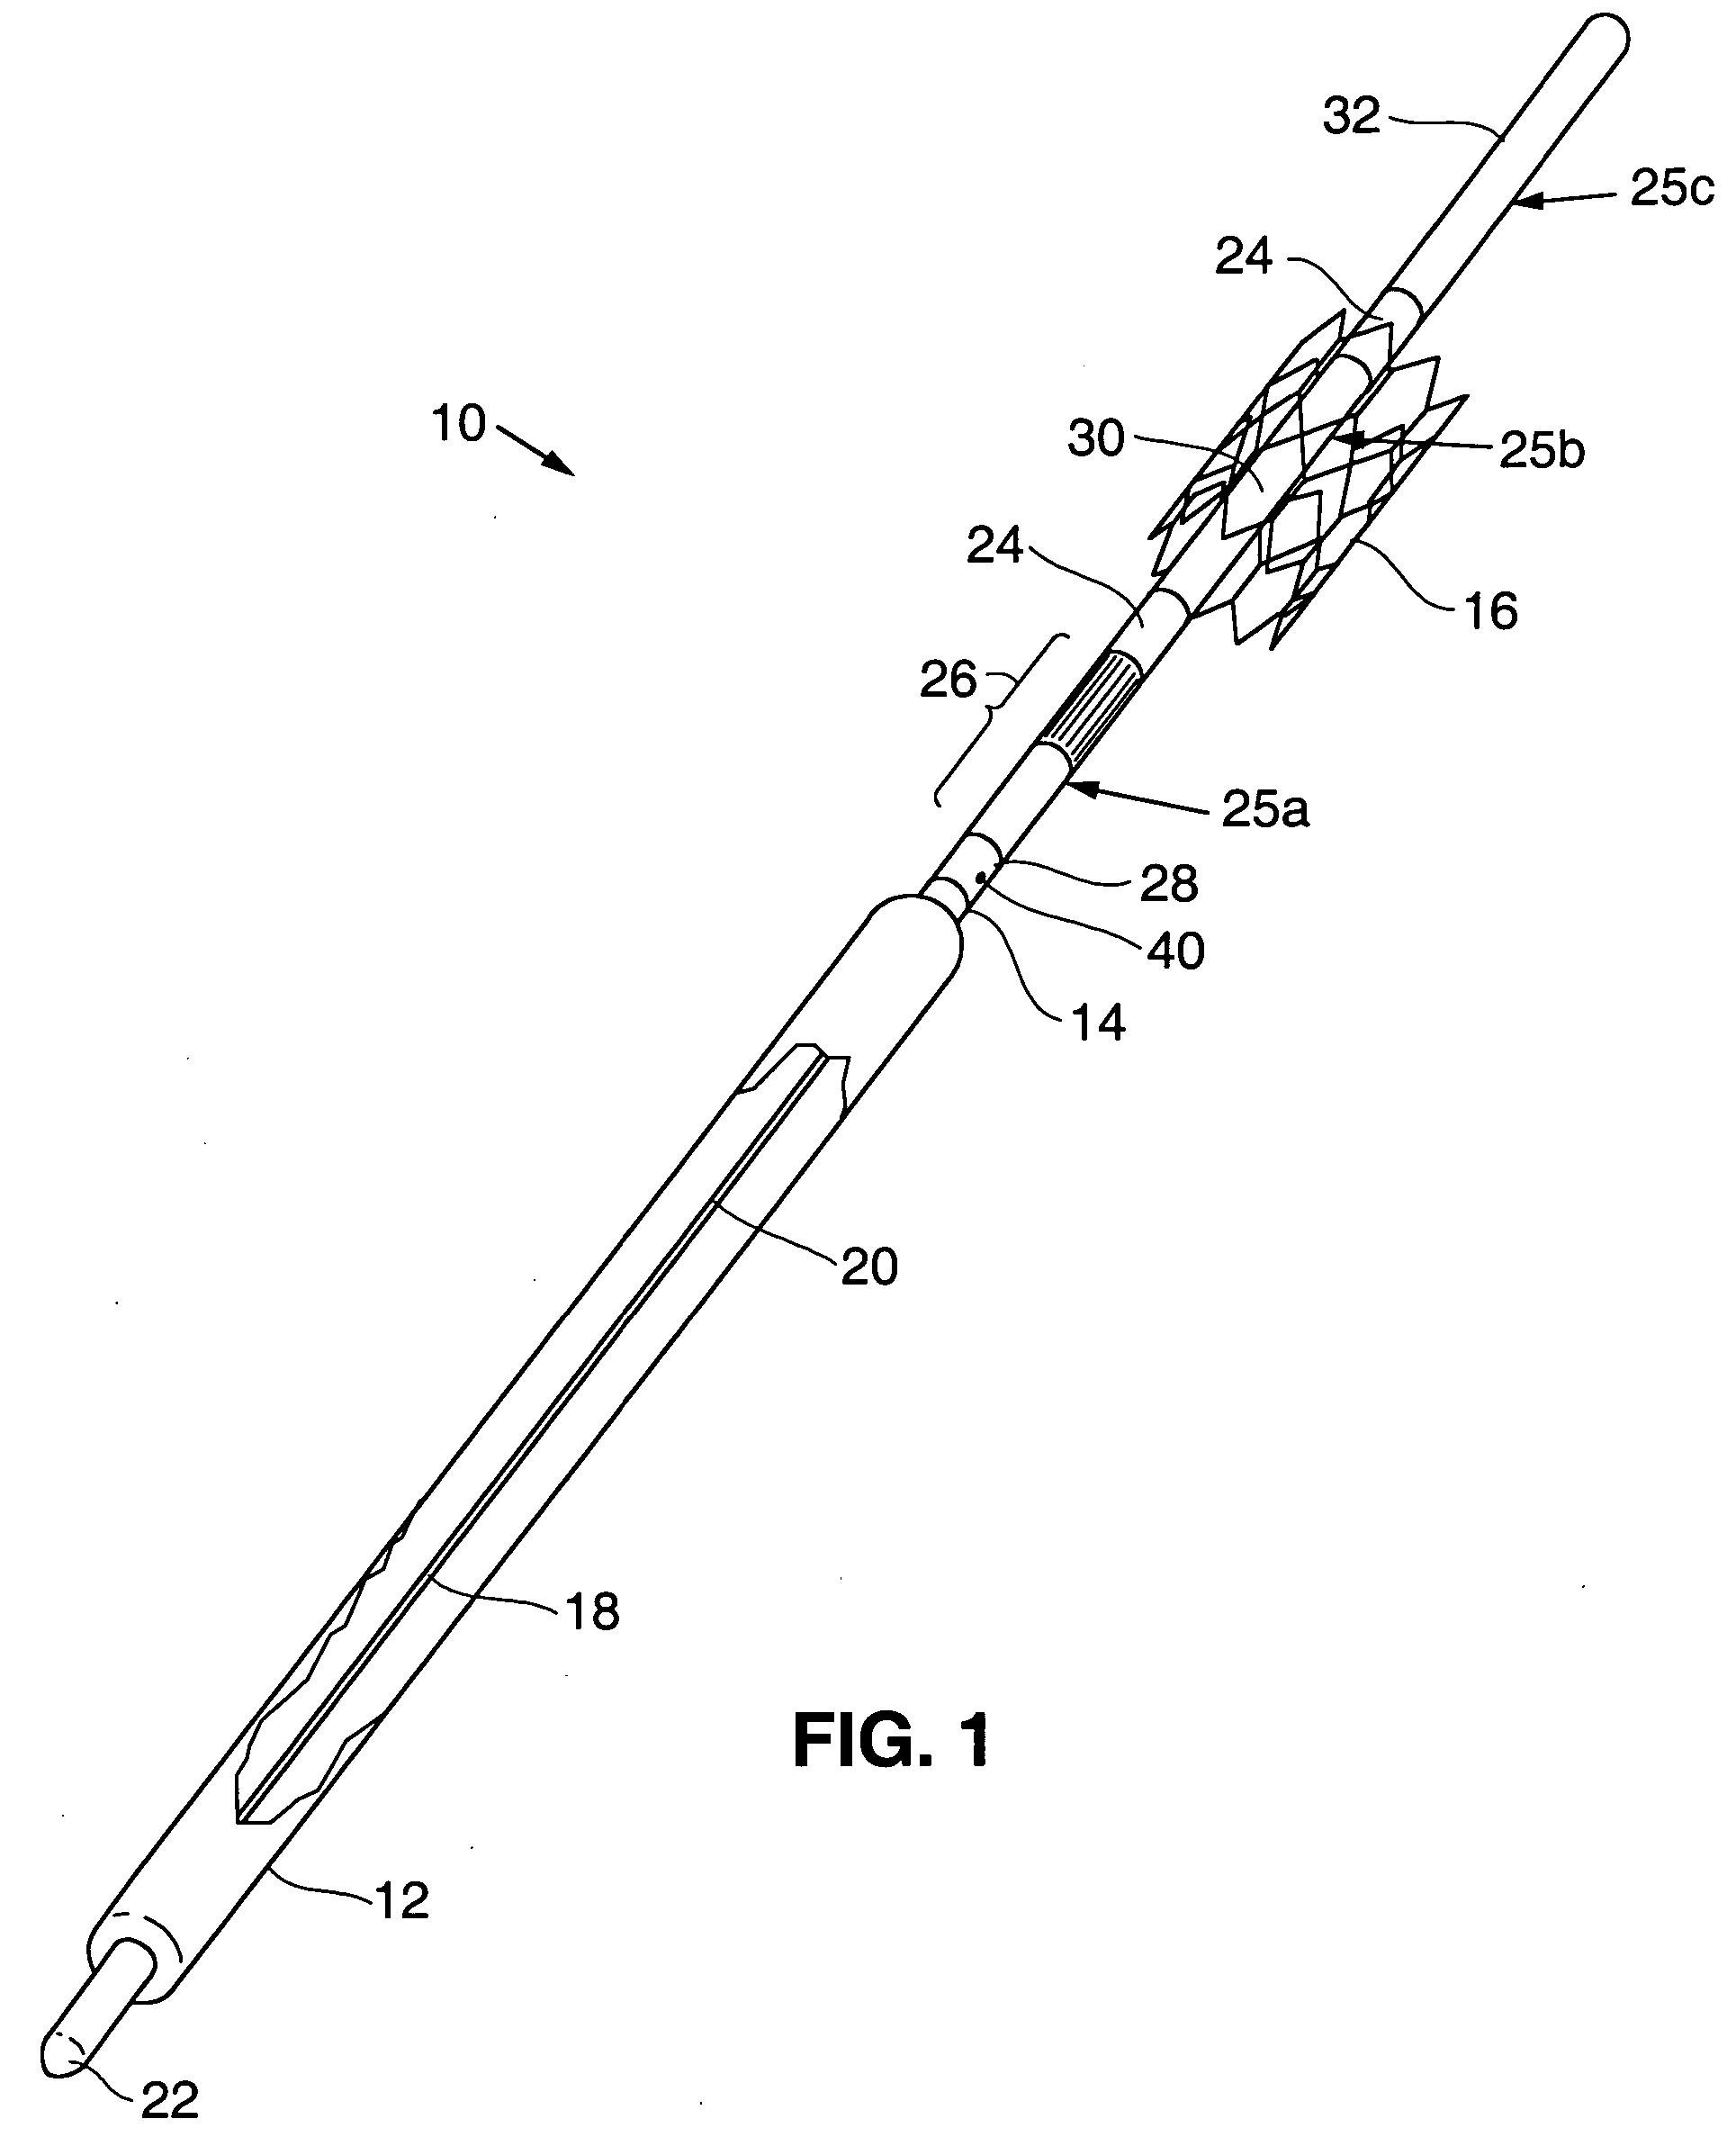 Intravascular delivery system for therapeutic agents